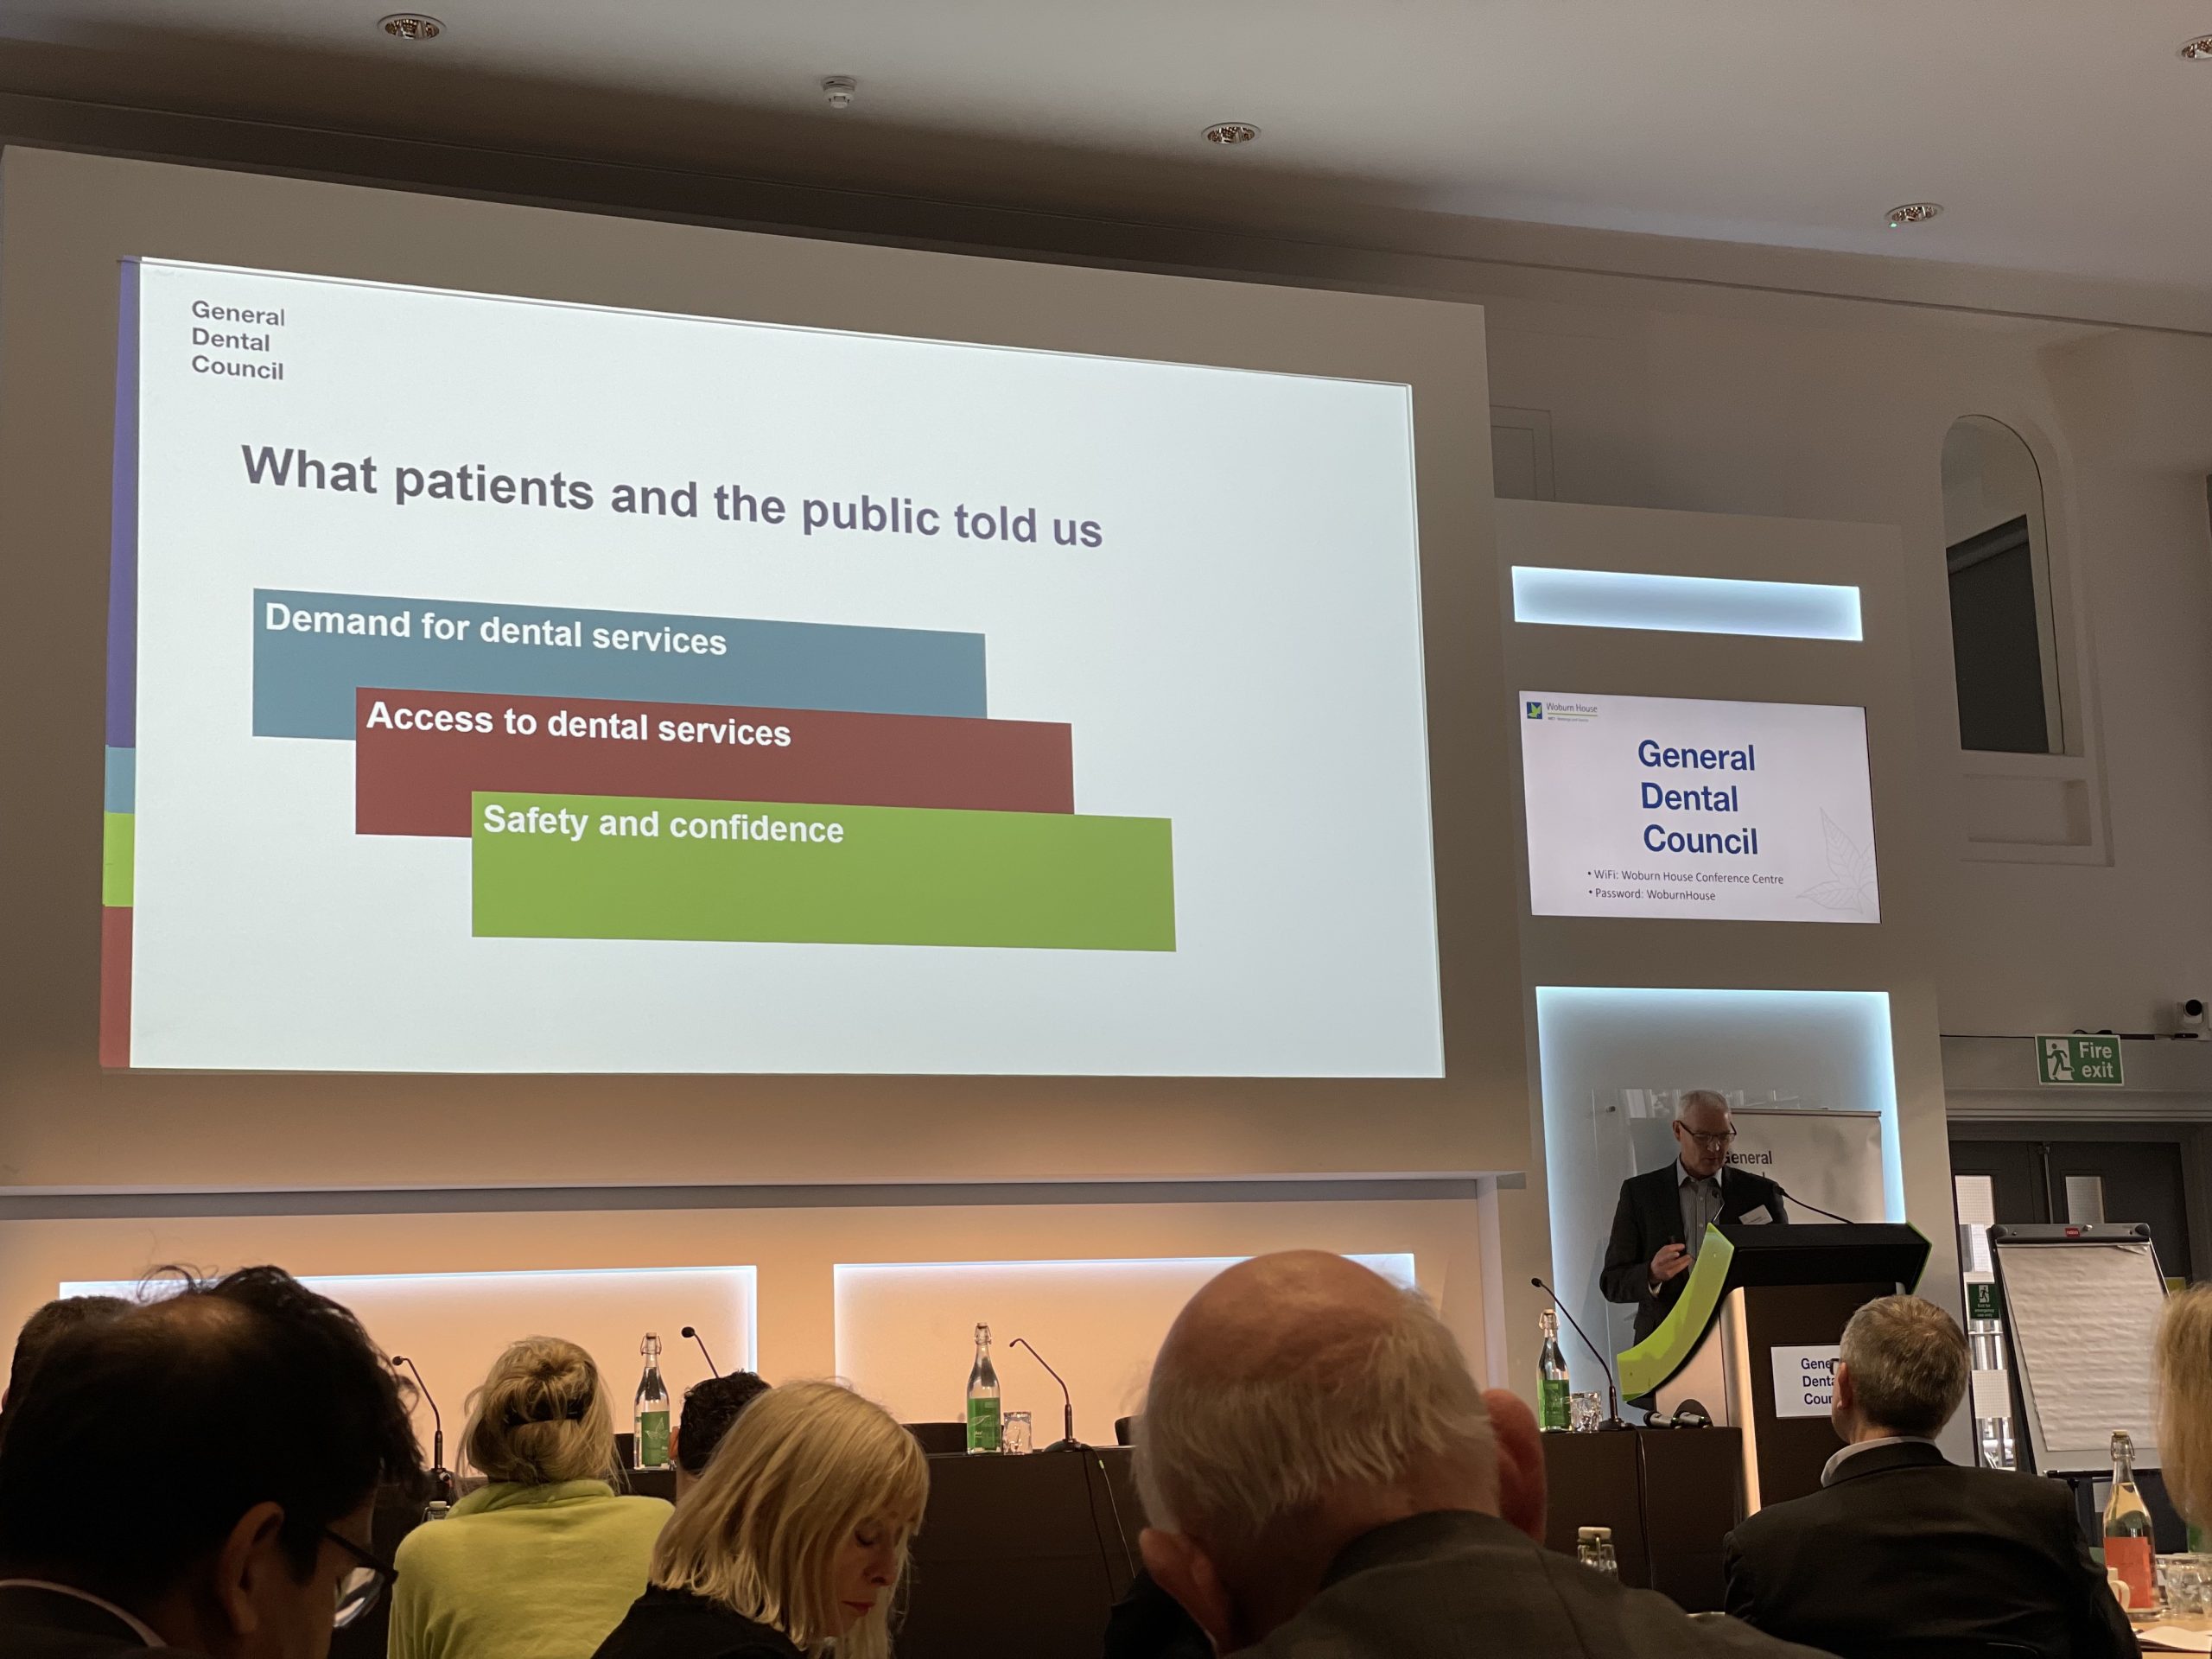 Tamara Milanovic attended the General Dental Council’s Dental Leadership Network event to find out what leaders in the profession think about recent GDC updates and the issues the sector is facing.